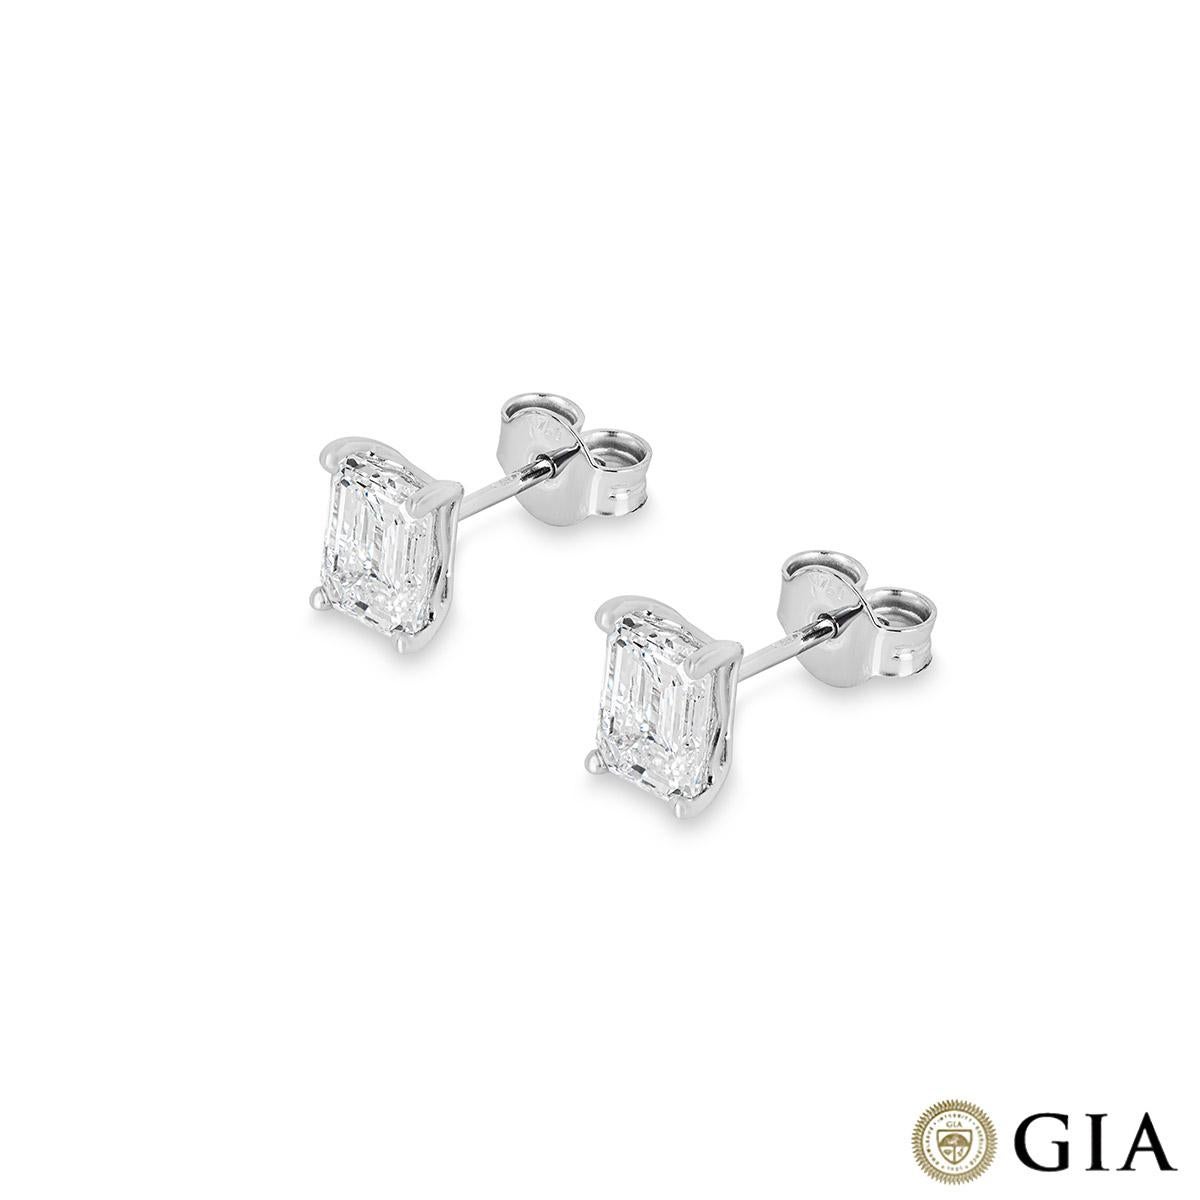 An exquisite pair of 18k white gold diamond stud earrings. The earrings feature emerald cut diamonds in a 4 prong mount. The first diamond weighs 1.01ct, G colour and VVS1 clarity with the second diamond weighing 1.00ct, G colour and VVS2 clarity.